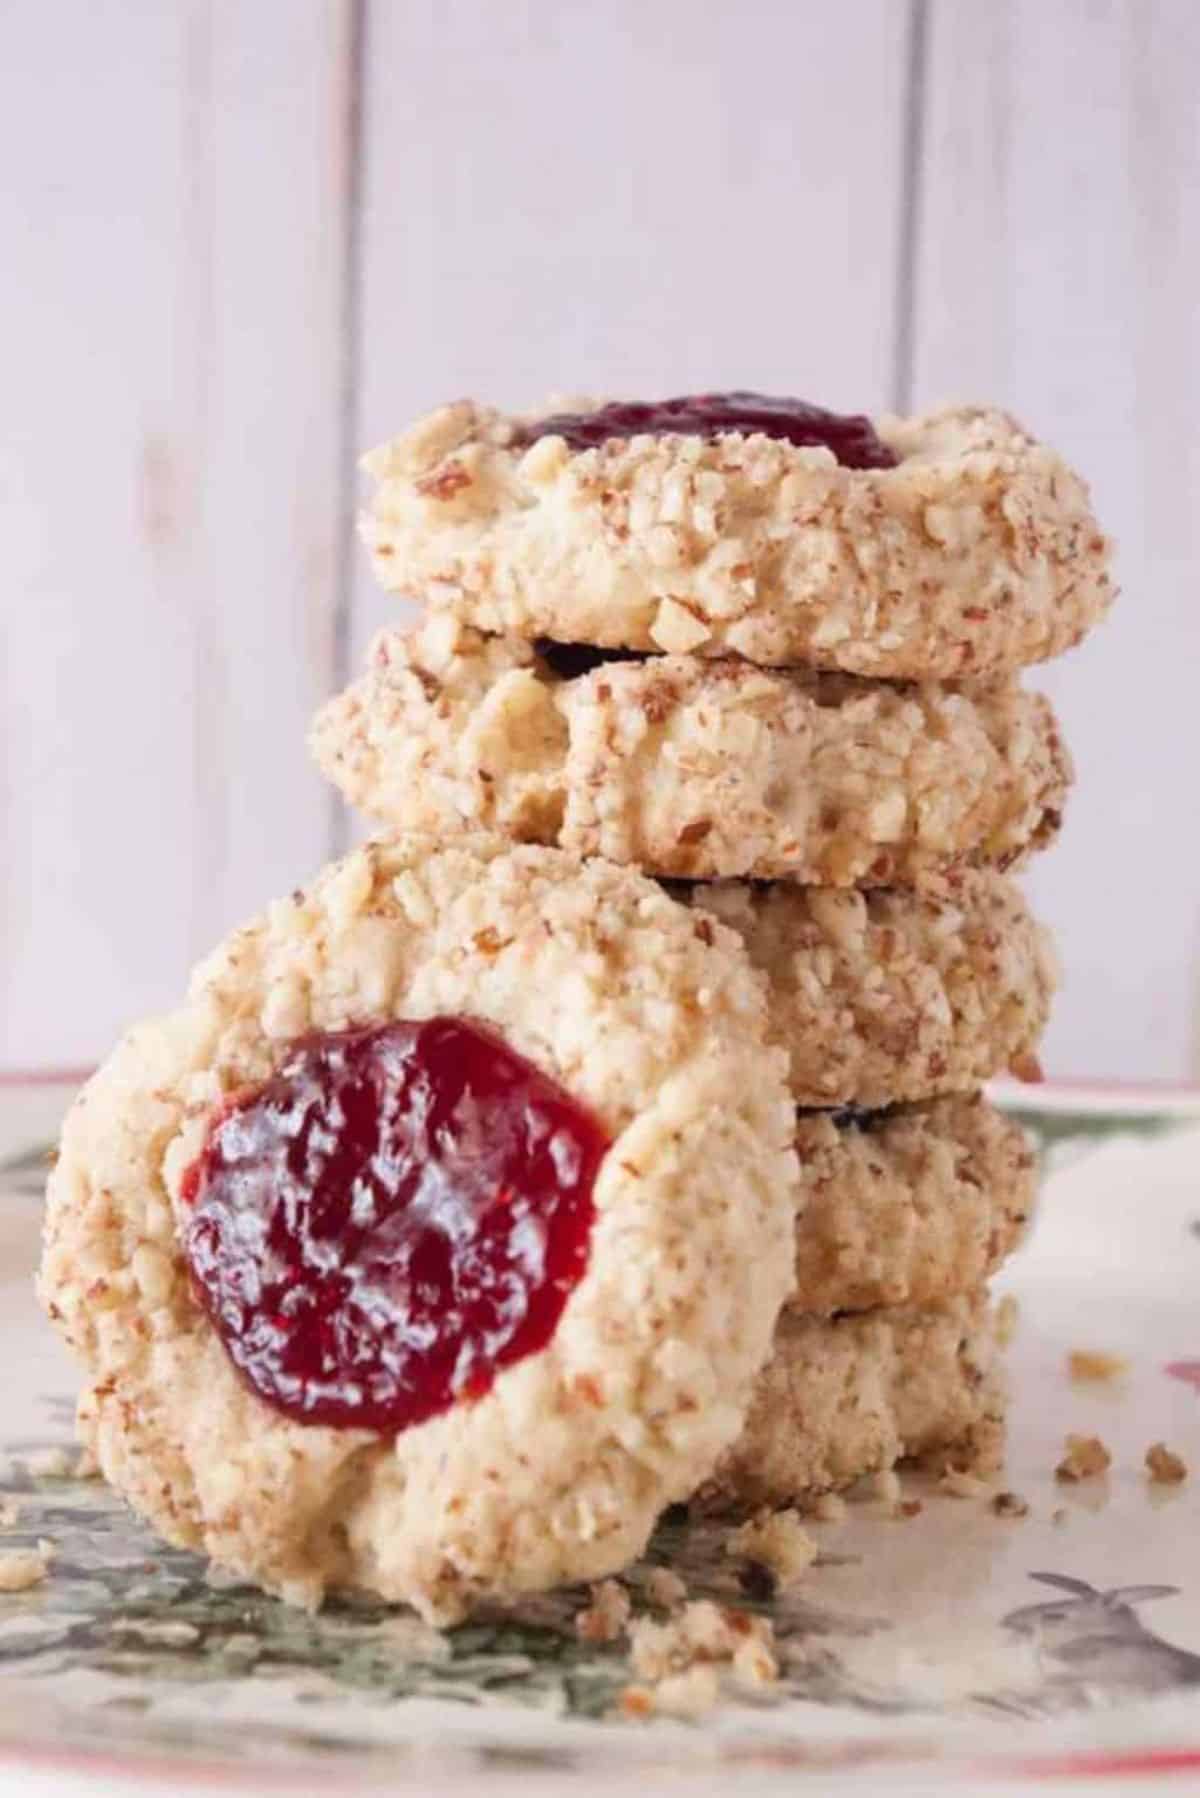 A pile of crunchy Oatmeal Jam Thumbprint Cookies on a plate.